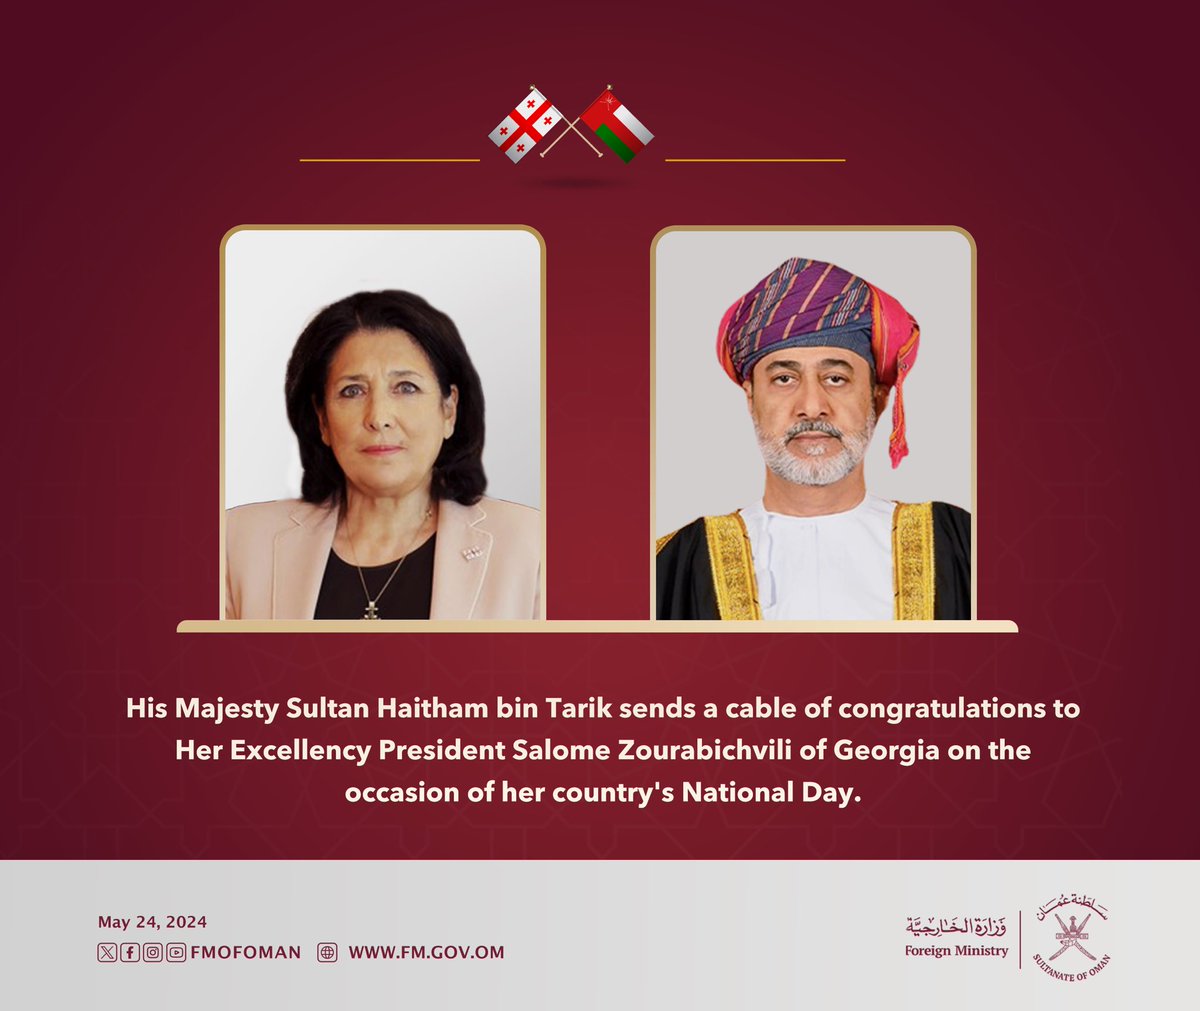 His Majesty the Sultan sends a cable of congratulations to Her Excellency President Salome Zourabichvili of #Georgia on the occasion of her country's National Day.